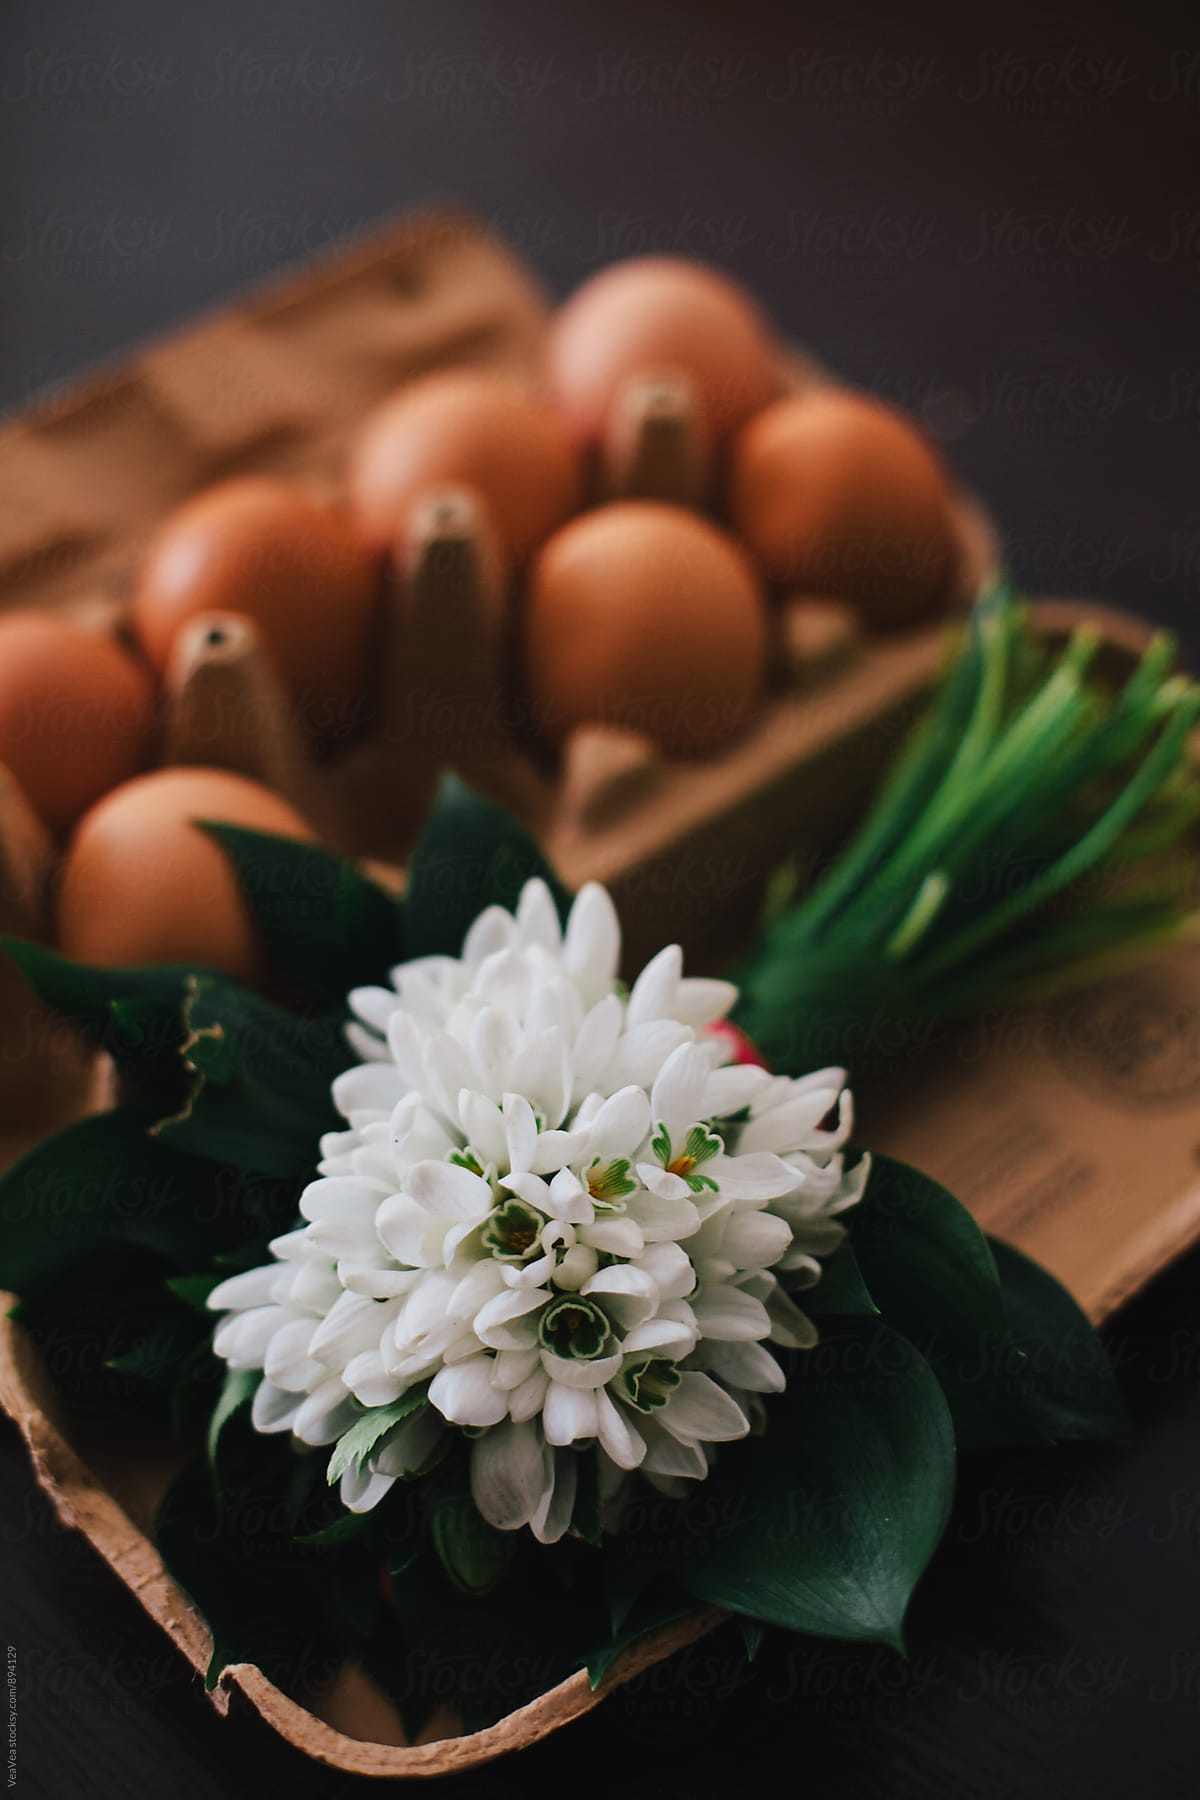 Bouquet of snowdrops and eggs on a table